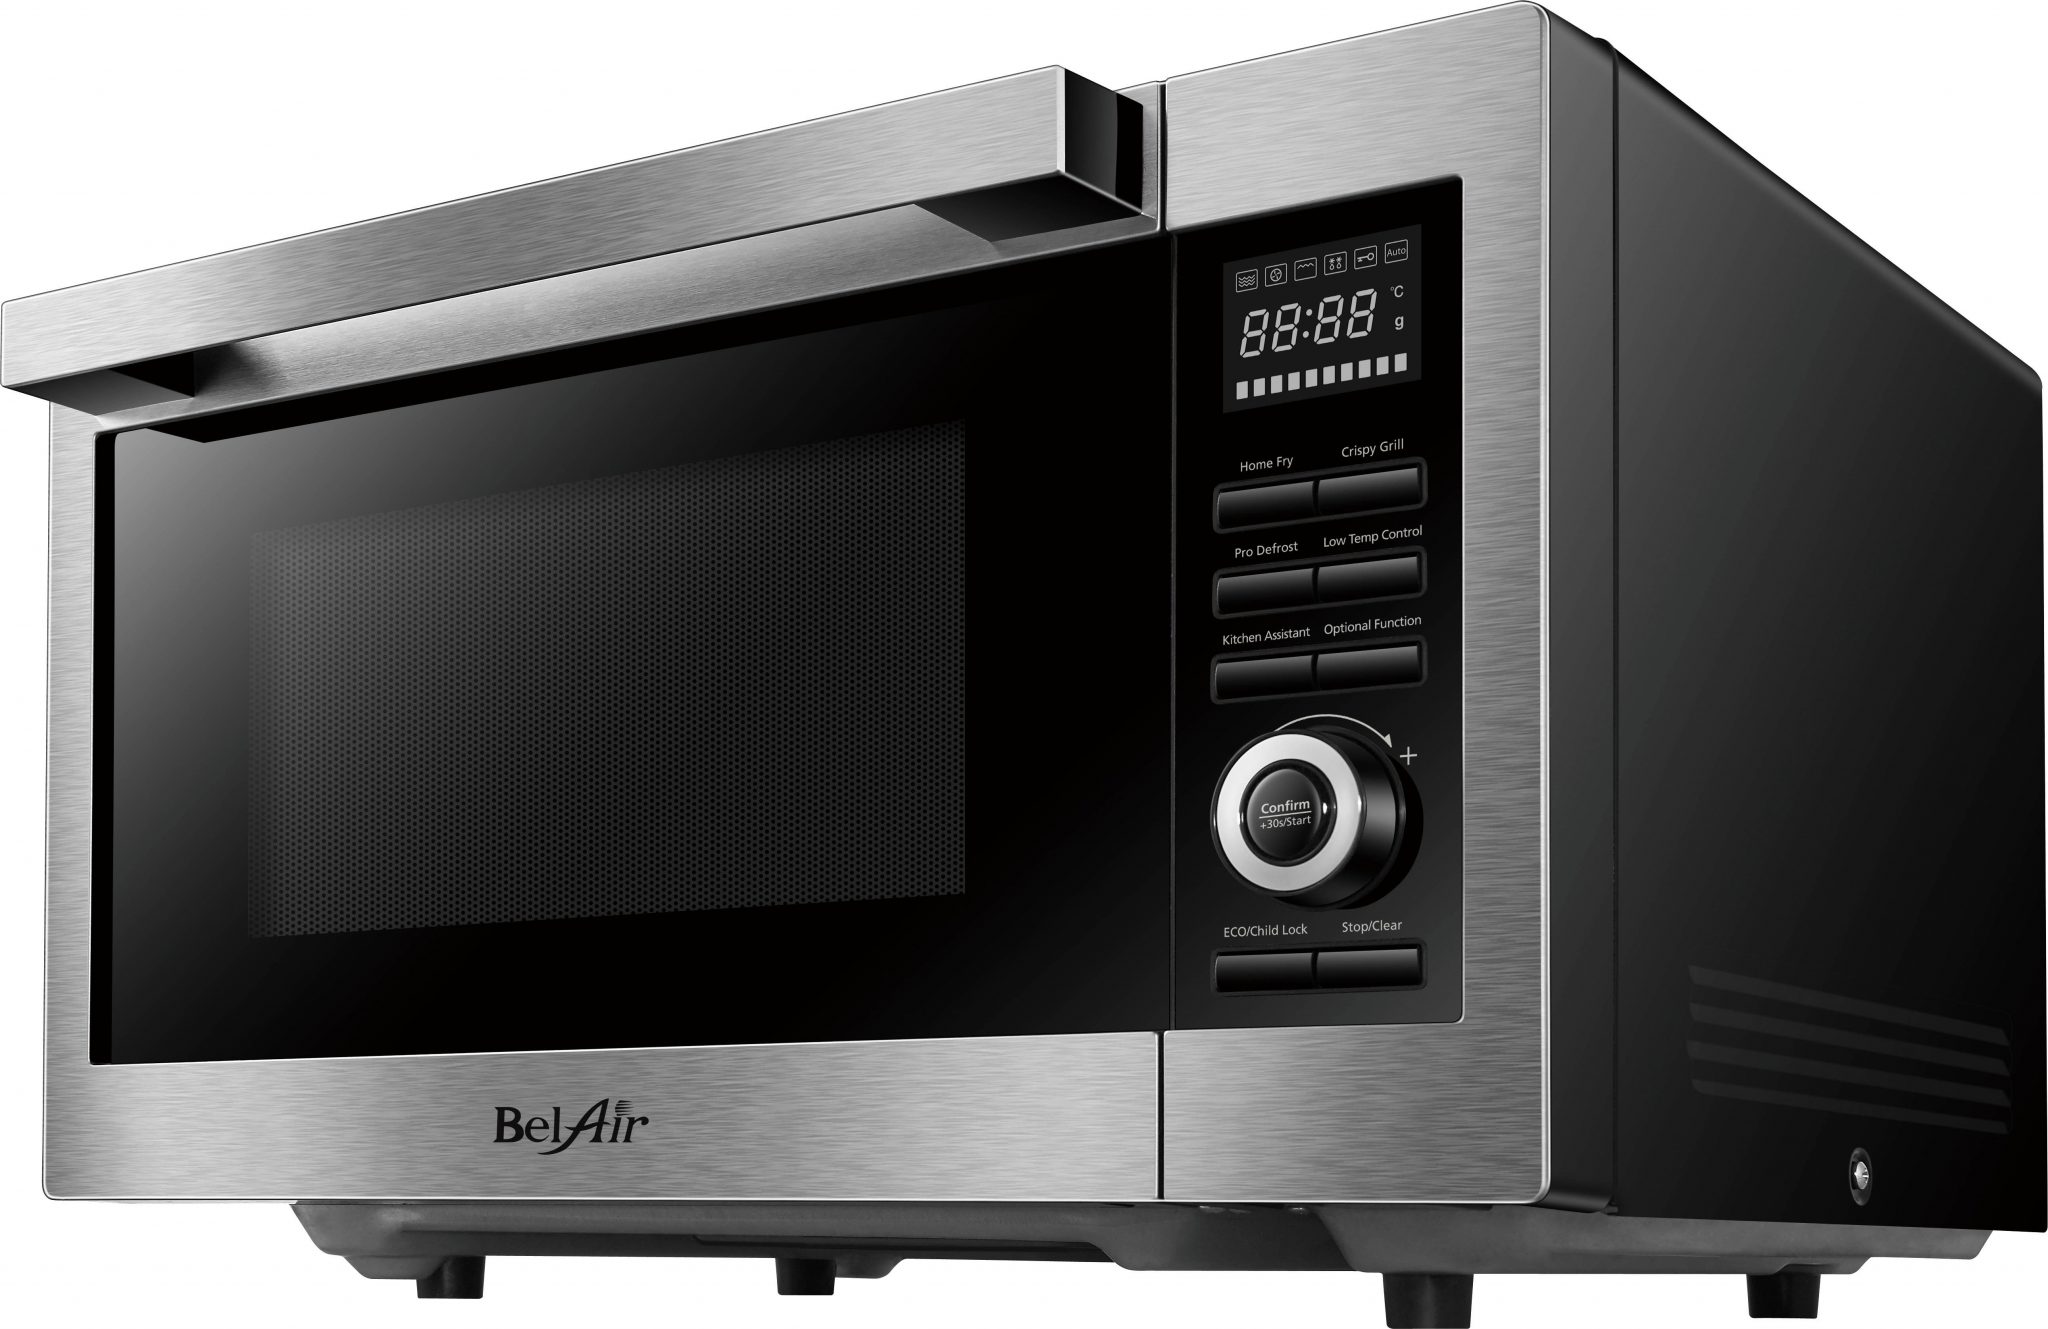 What Are The Essential Pros And Cons Of a Microwave Oven?